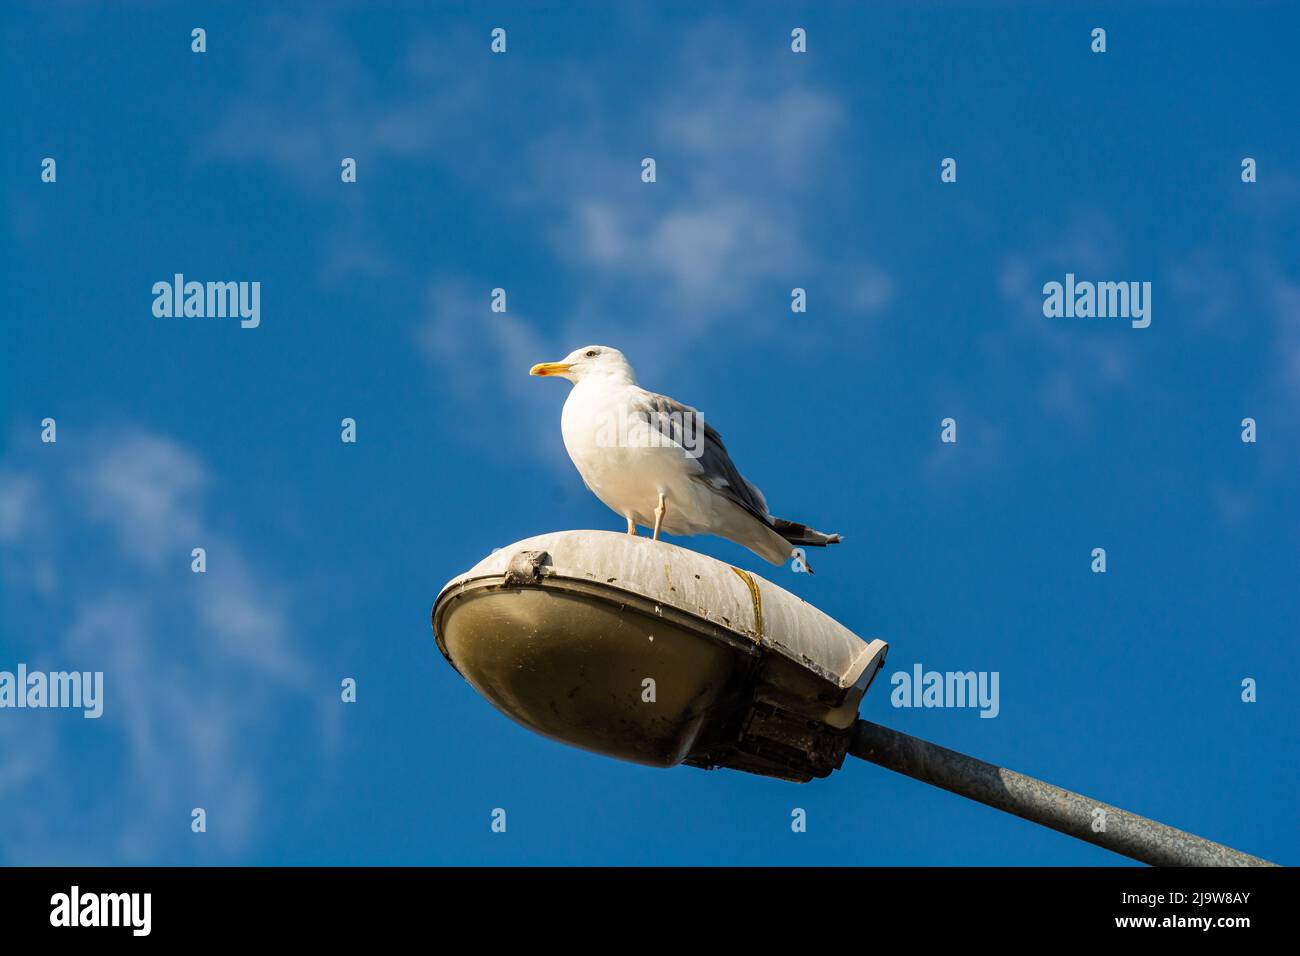 Gull sitting on the public light lamp with blue sky in background Stock Photo